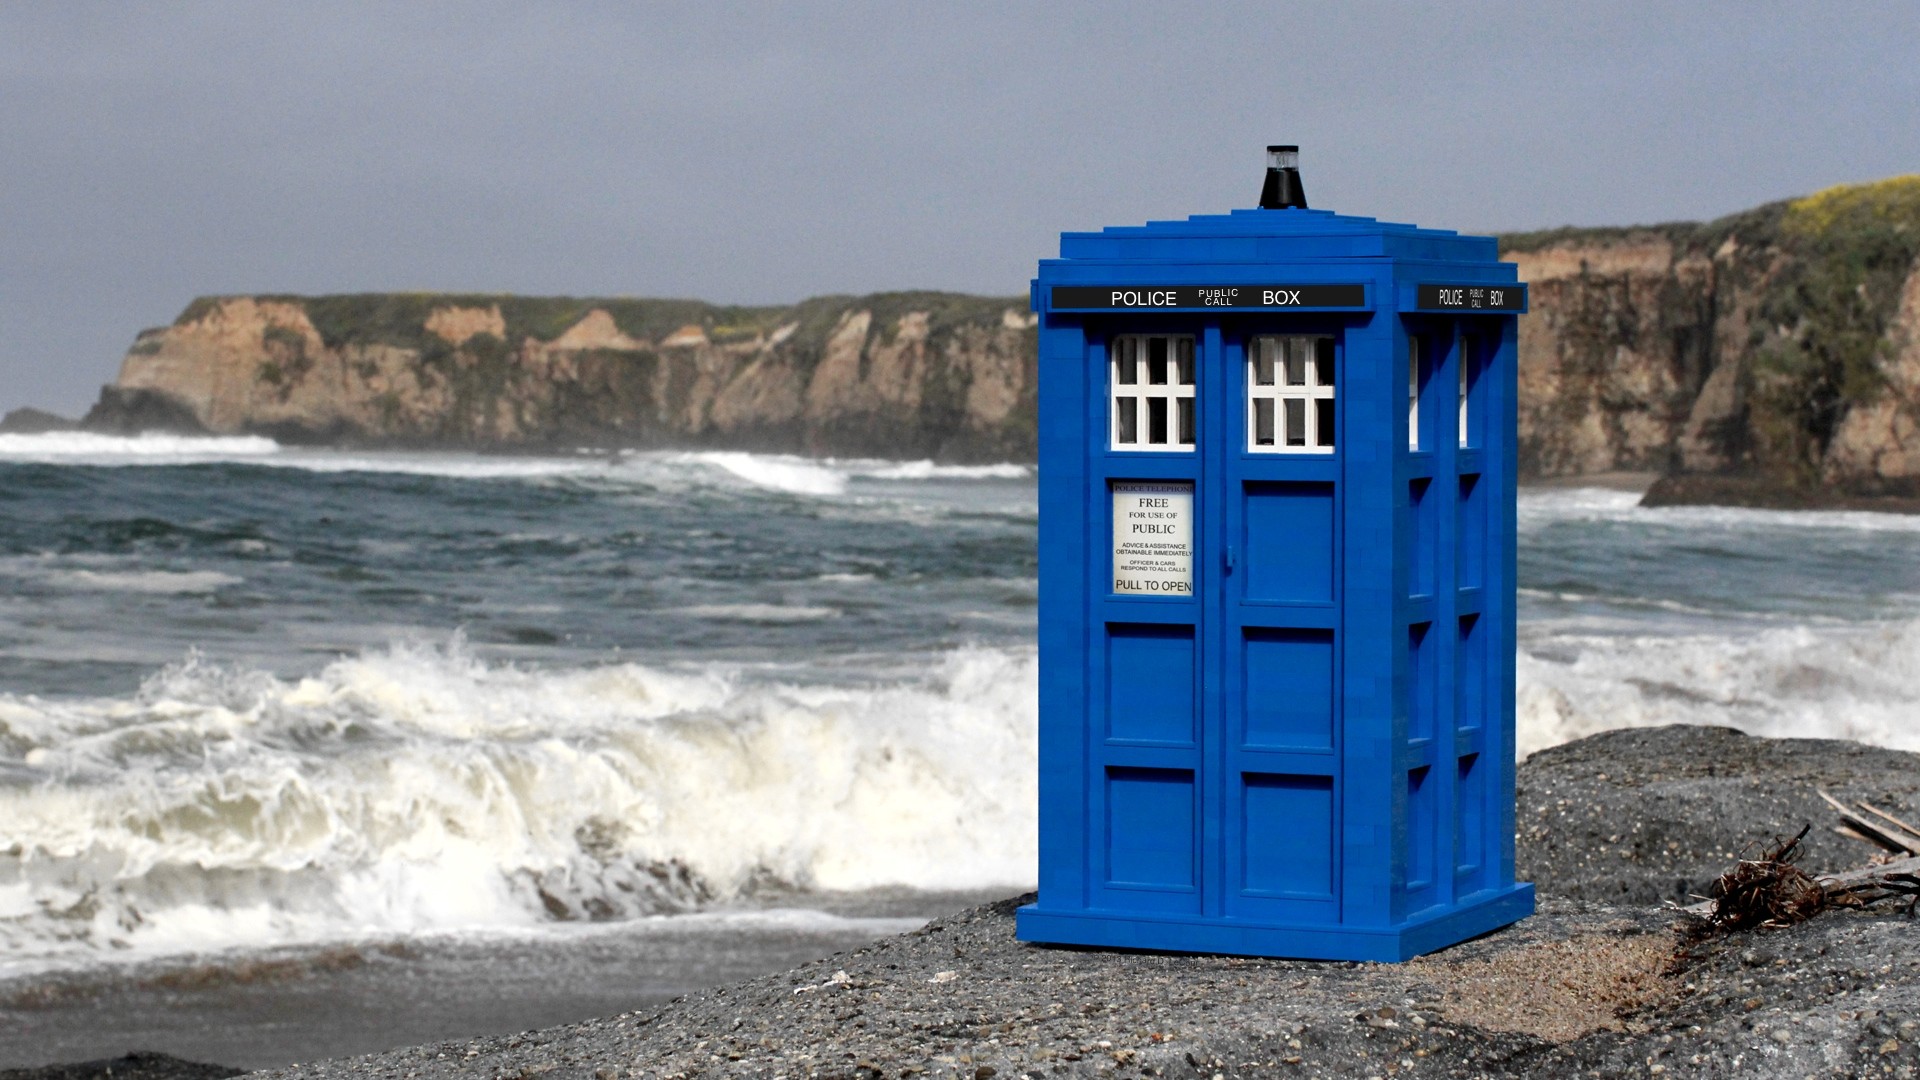 1920x1080 TARDIS D Live Wallpaper Android Apps on Google Play 1920Ã1080